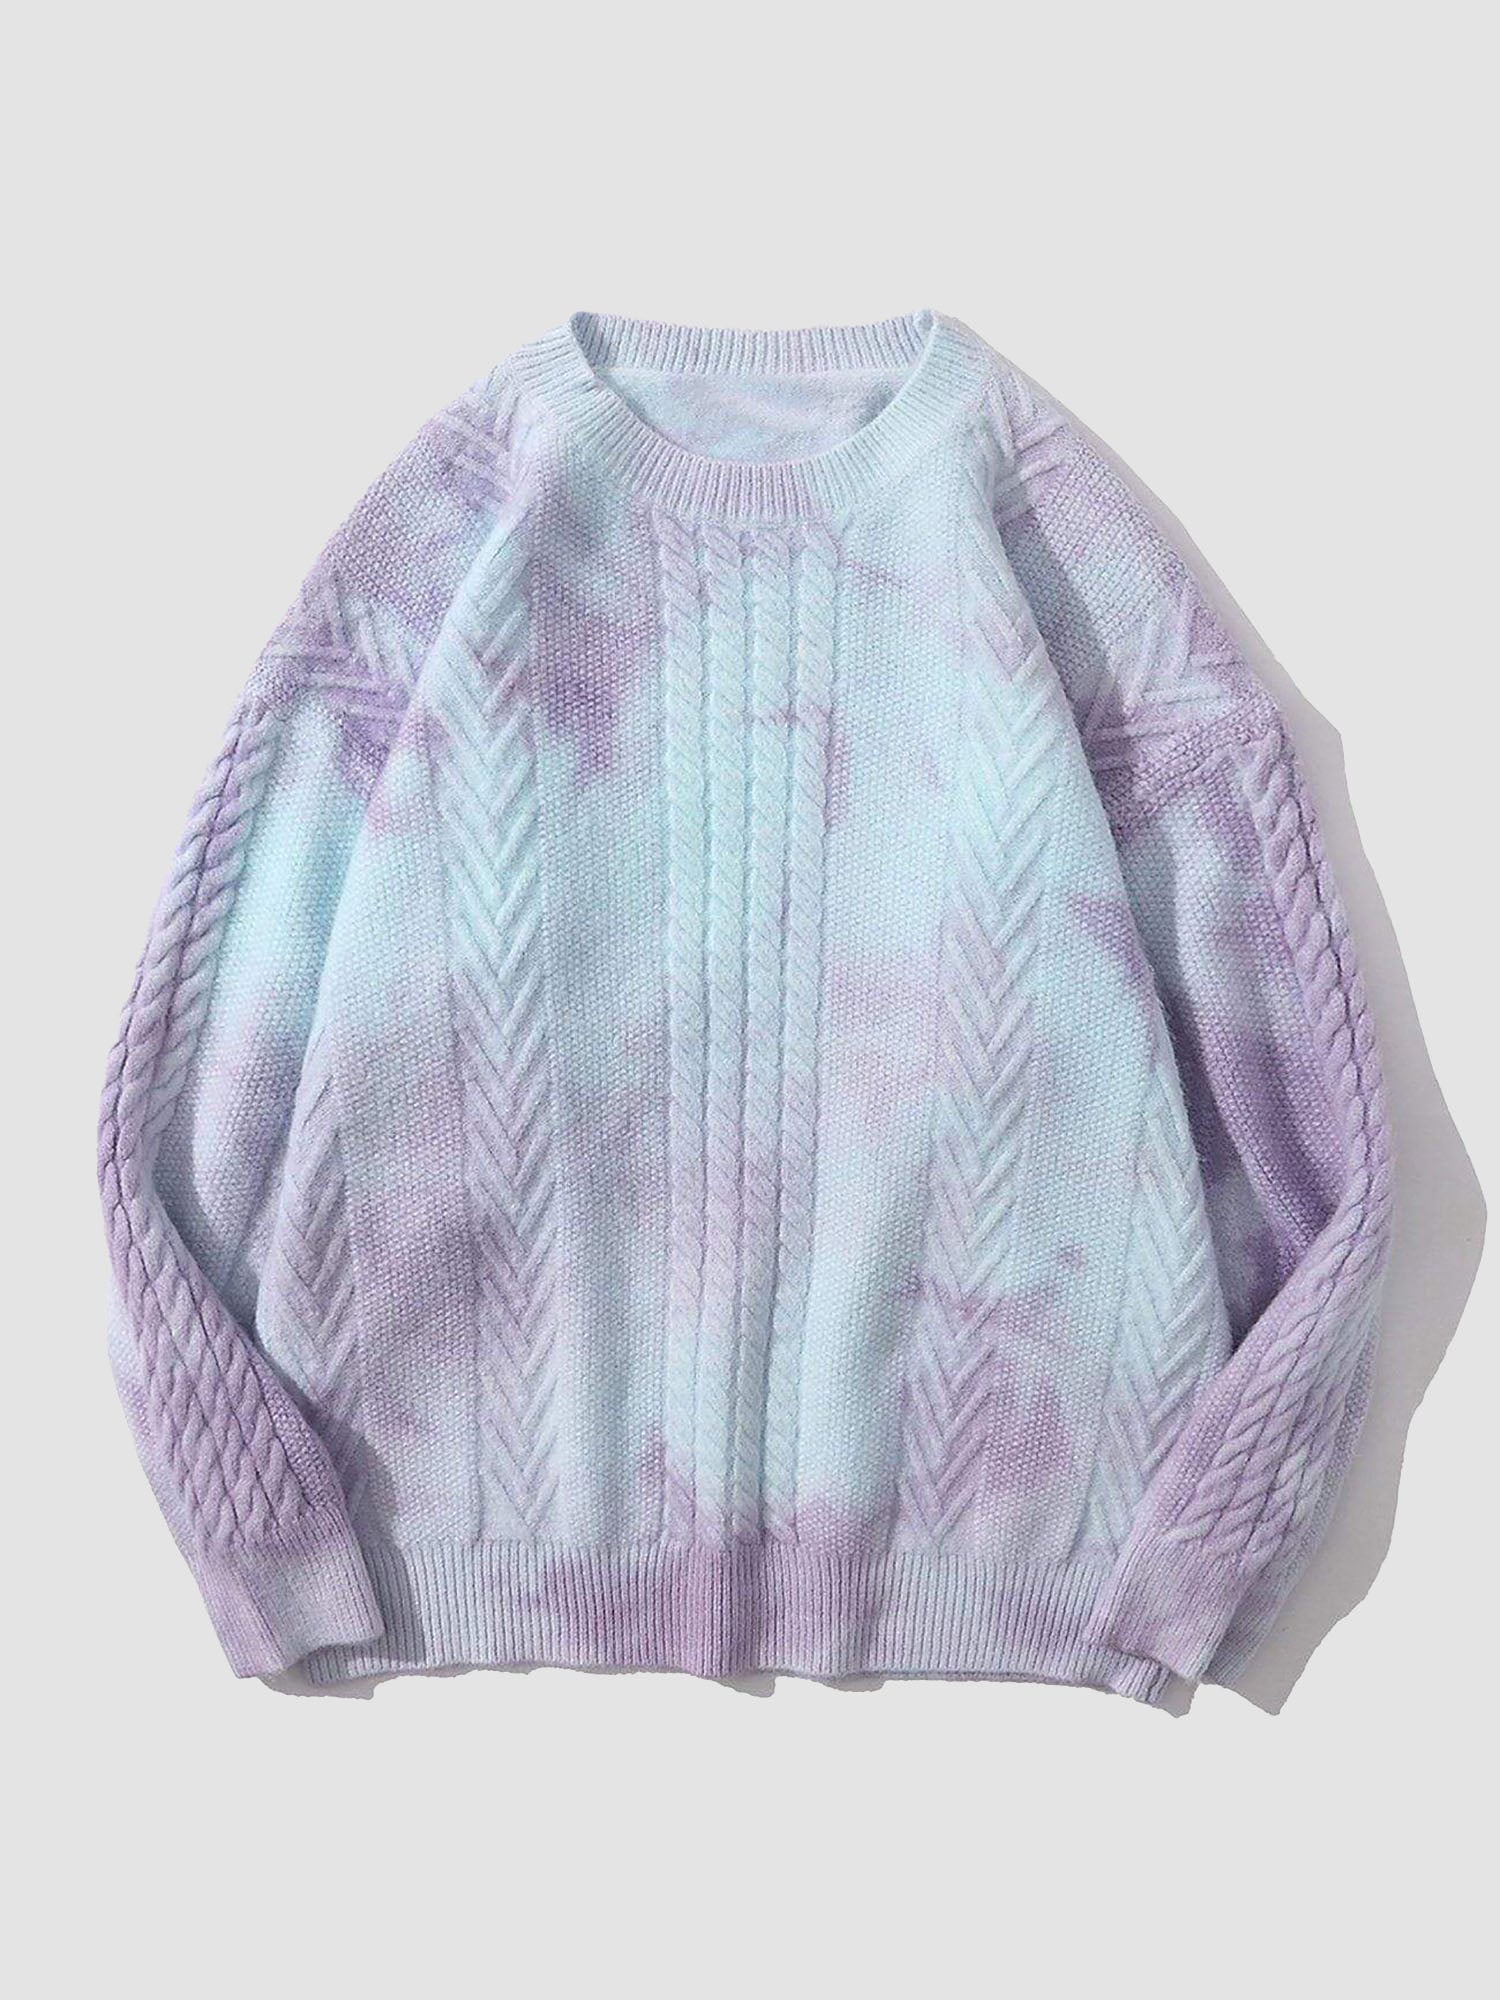 JUSTNOTAG Vintage Tie-dye Knitted Sweater